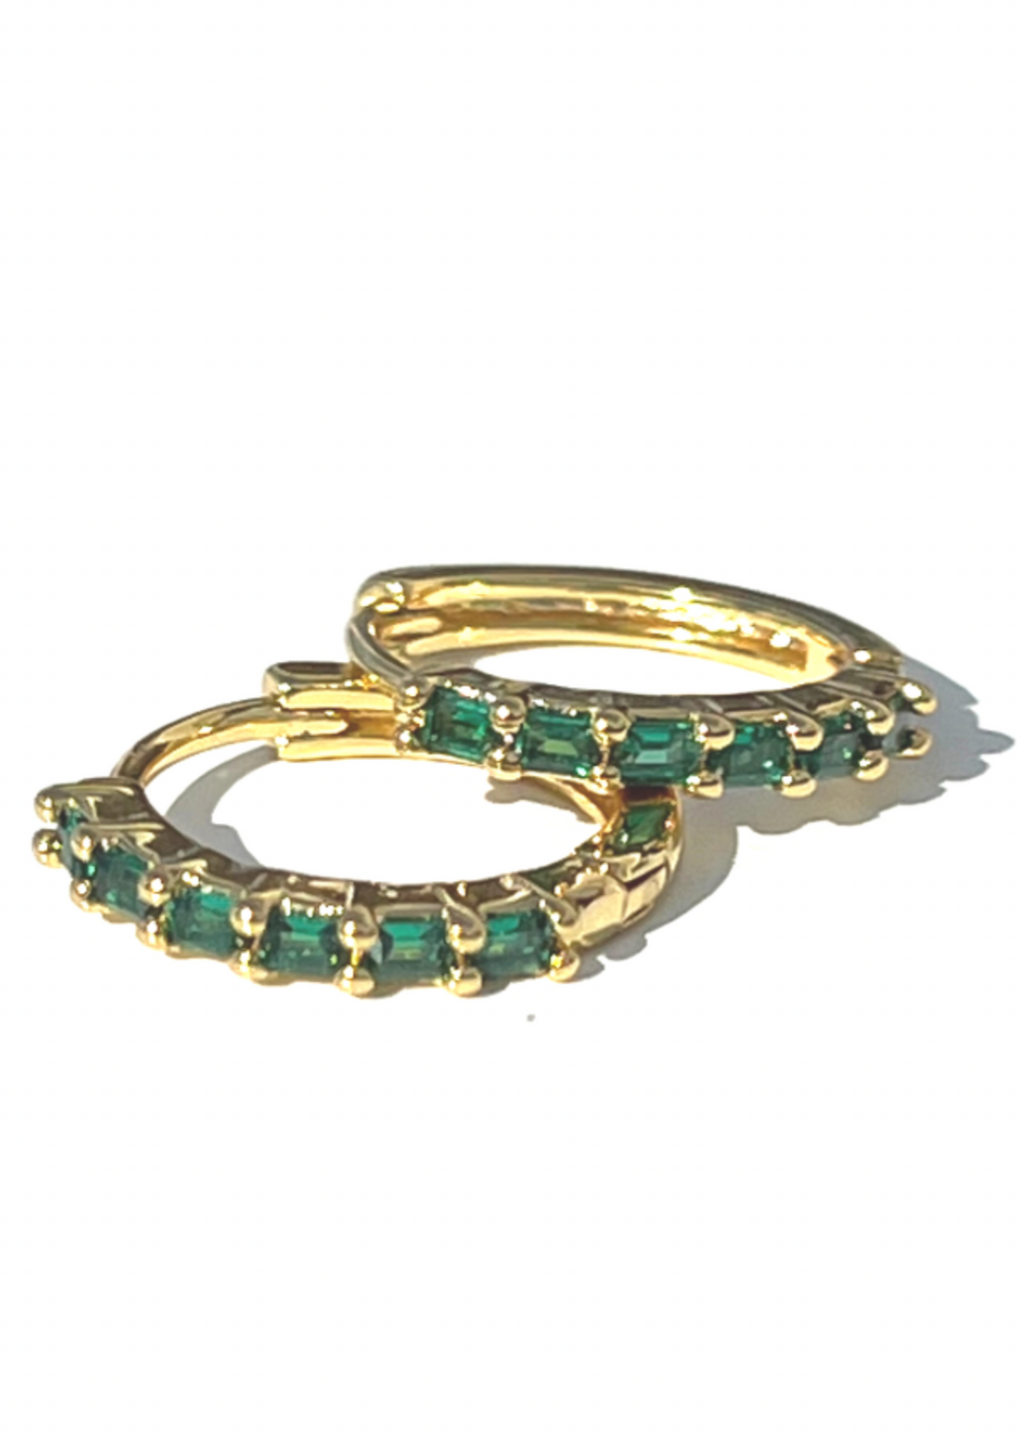 Emerald Baguette Sleepers - Gold, by Lindi Kingi x Kelly Our stunning Gold Baguette Sleepers with Emerald coloured Zirconia are super classic and easy to wear everyday. 